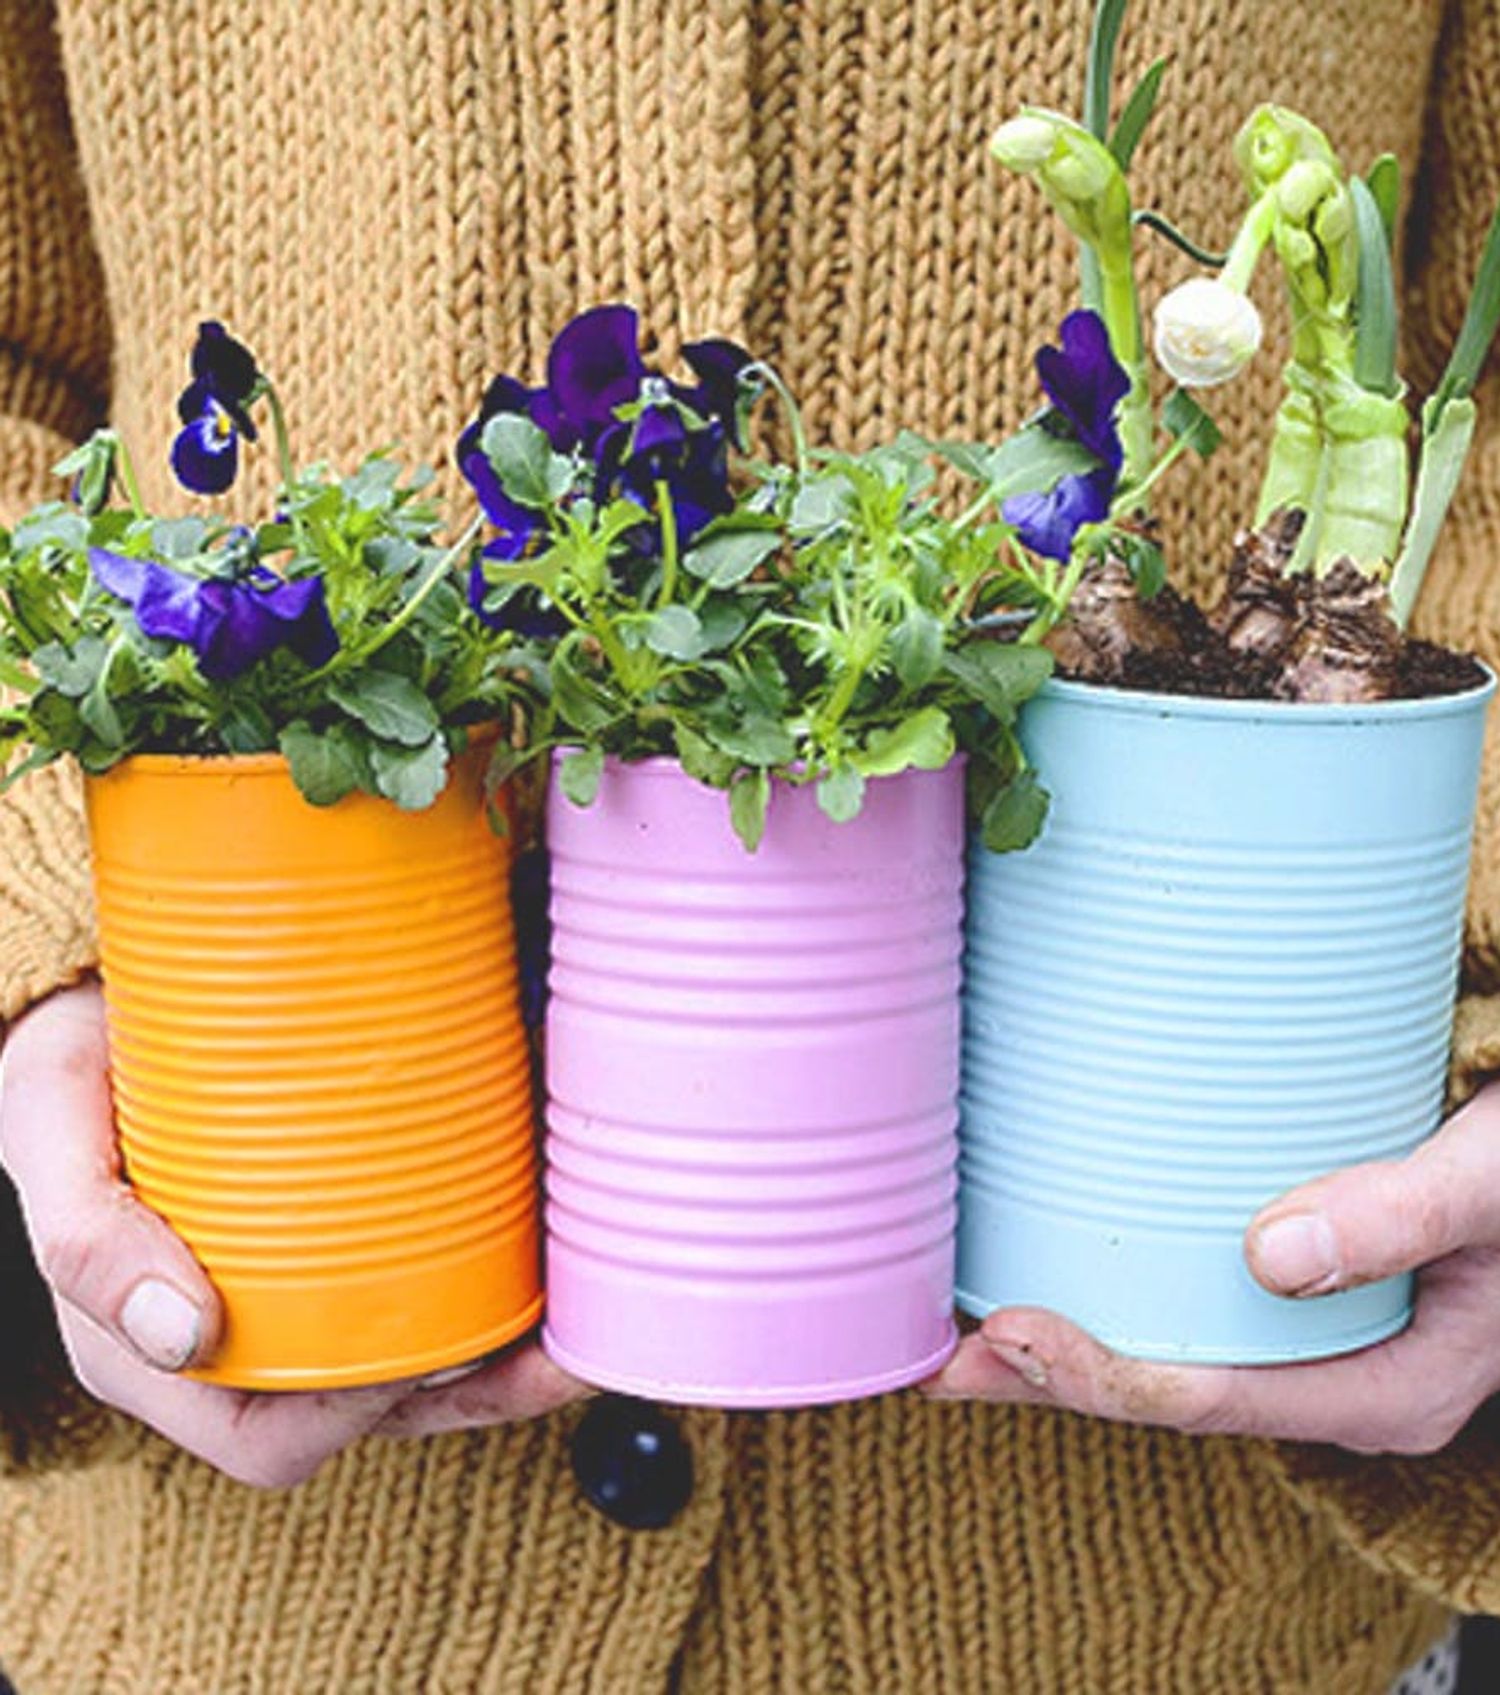 12 Upcycled Planters You Can Make From Stuff You Have at Home - Brit + Co